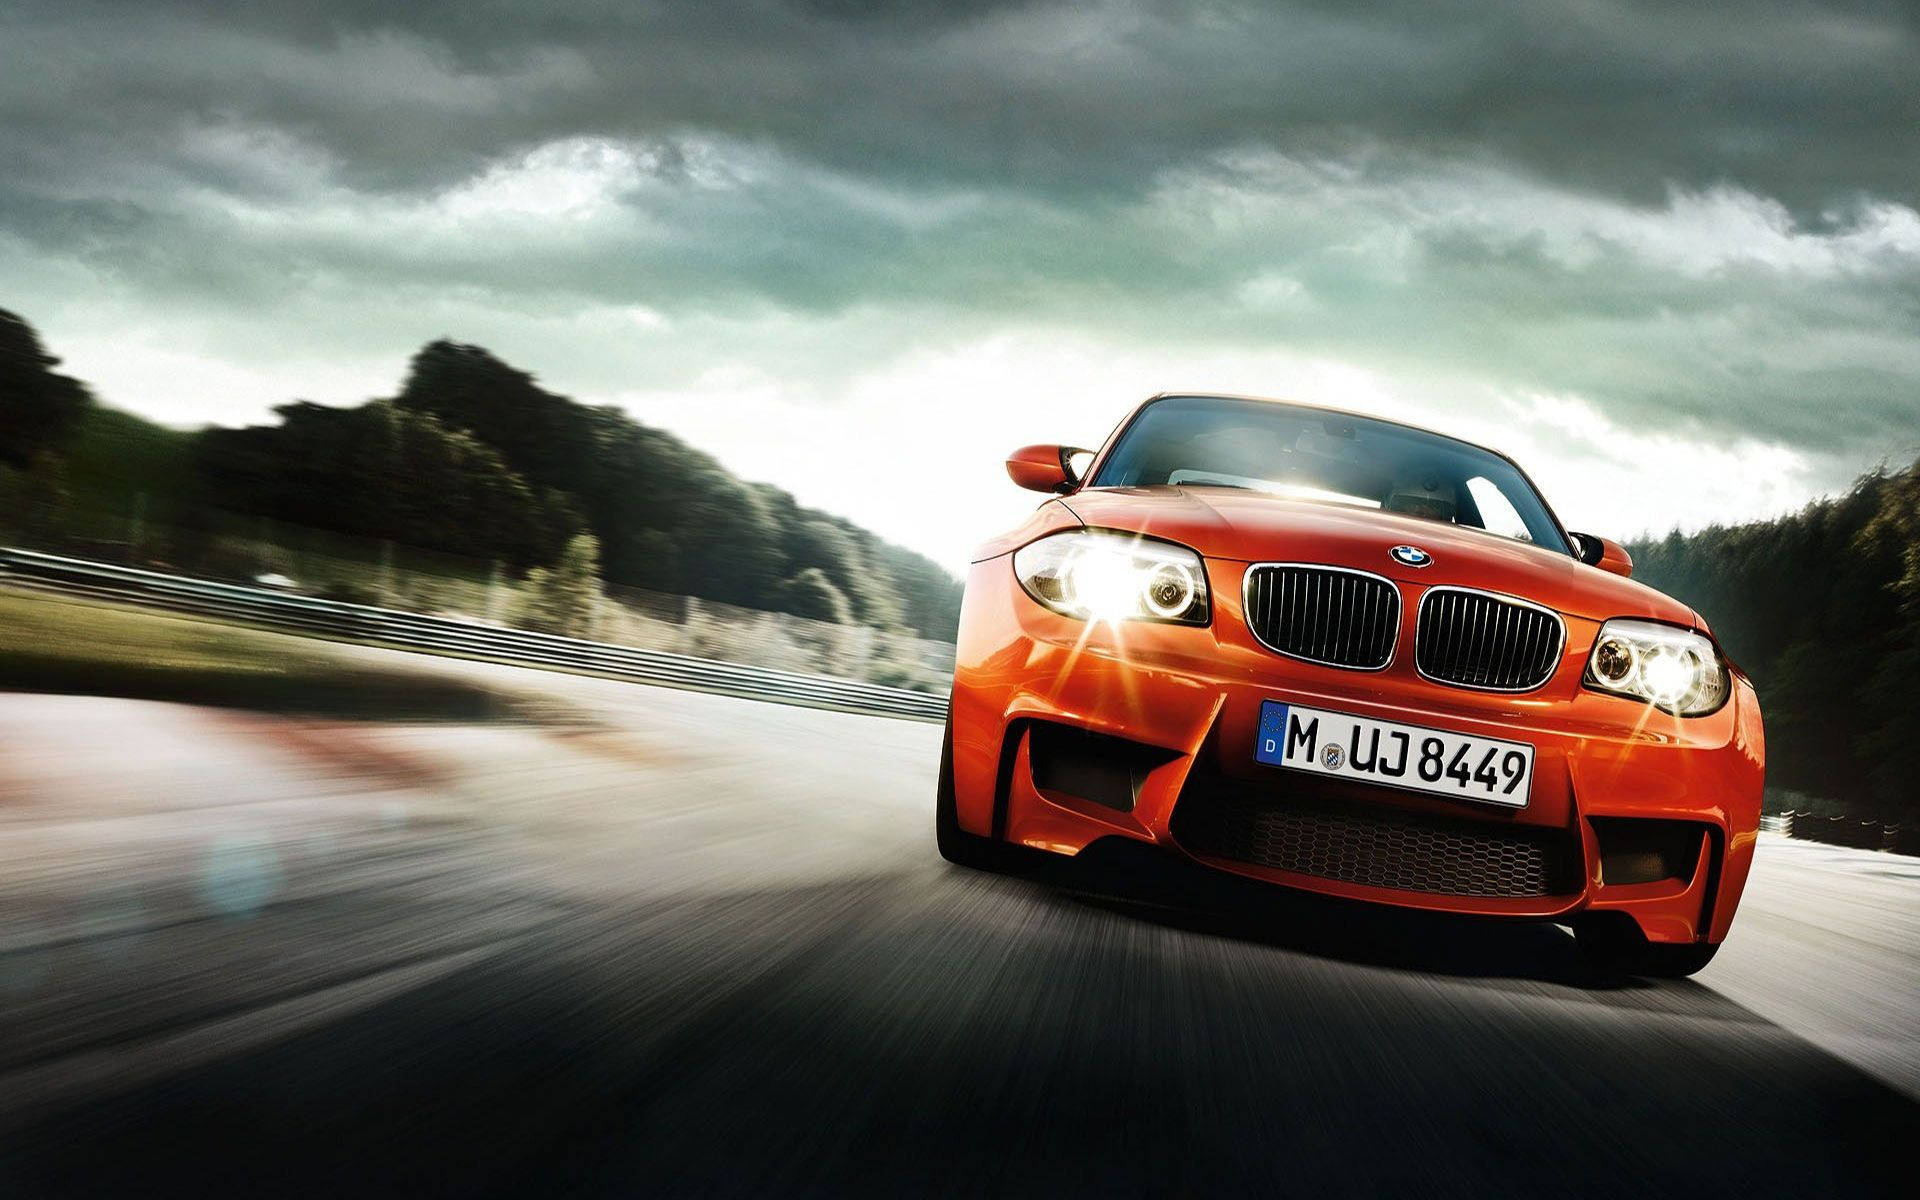 "A sporty orange BMW M4 delivers performance and style." Wallpaper